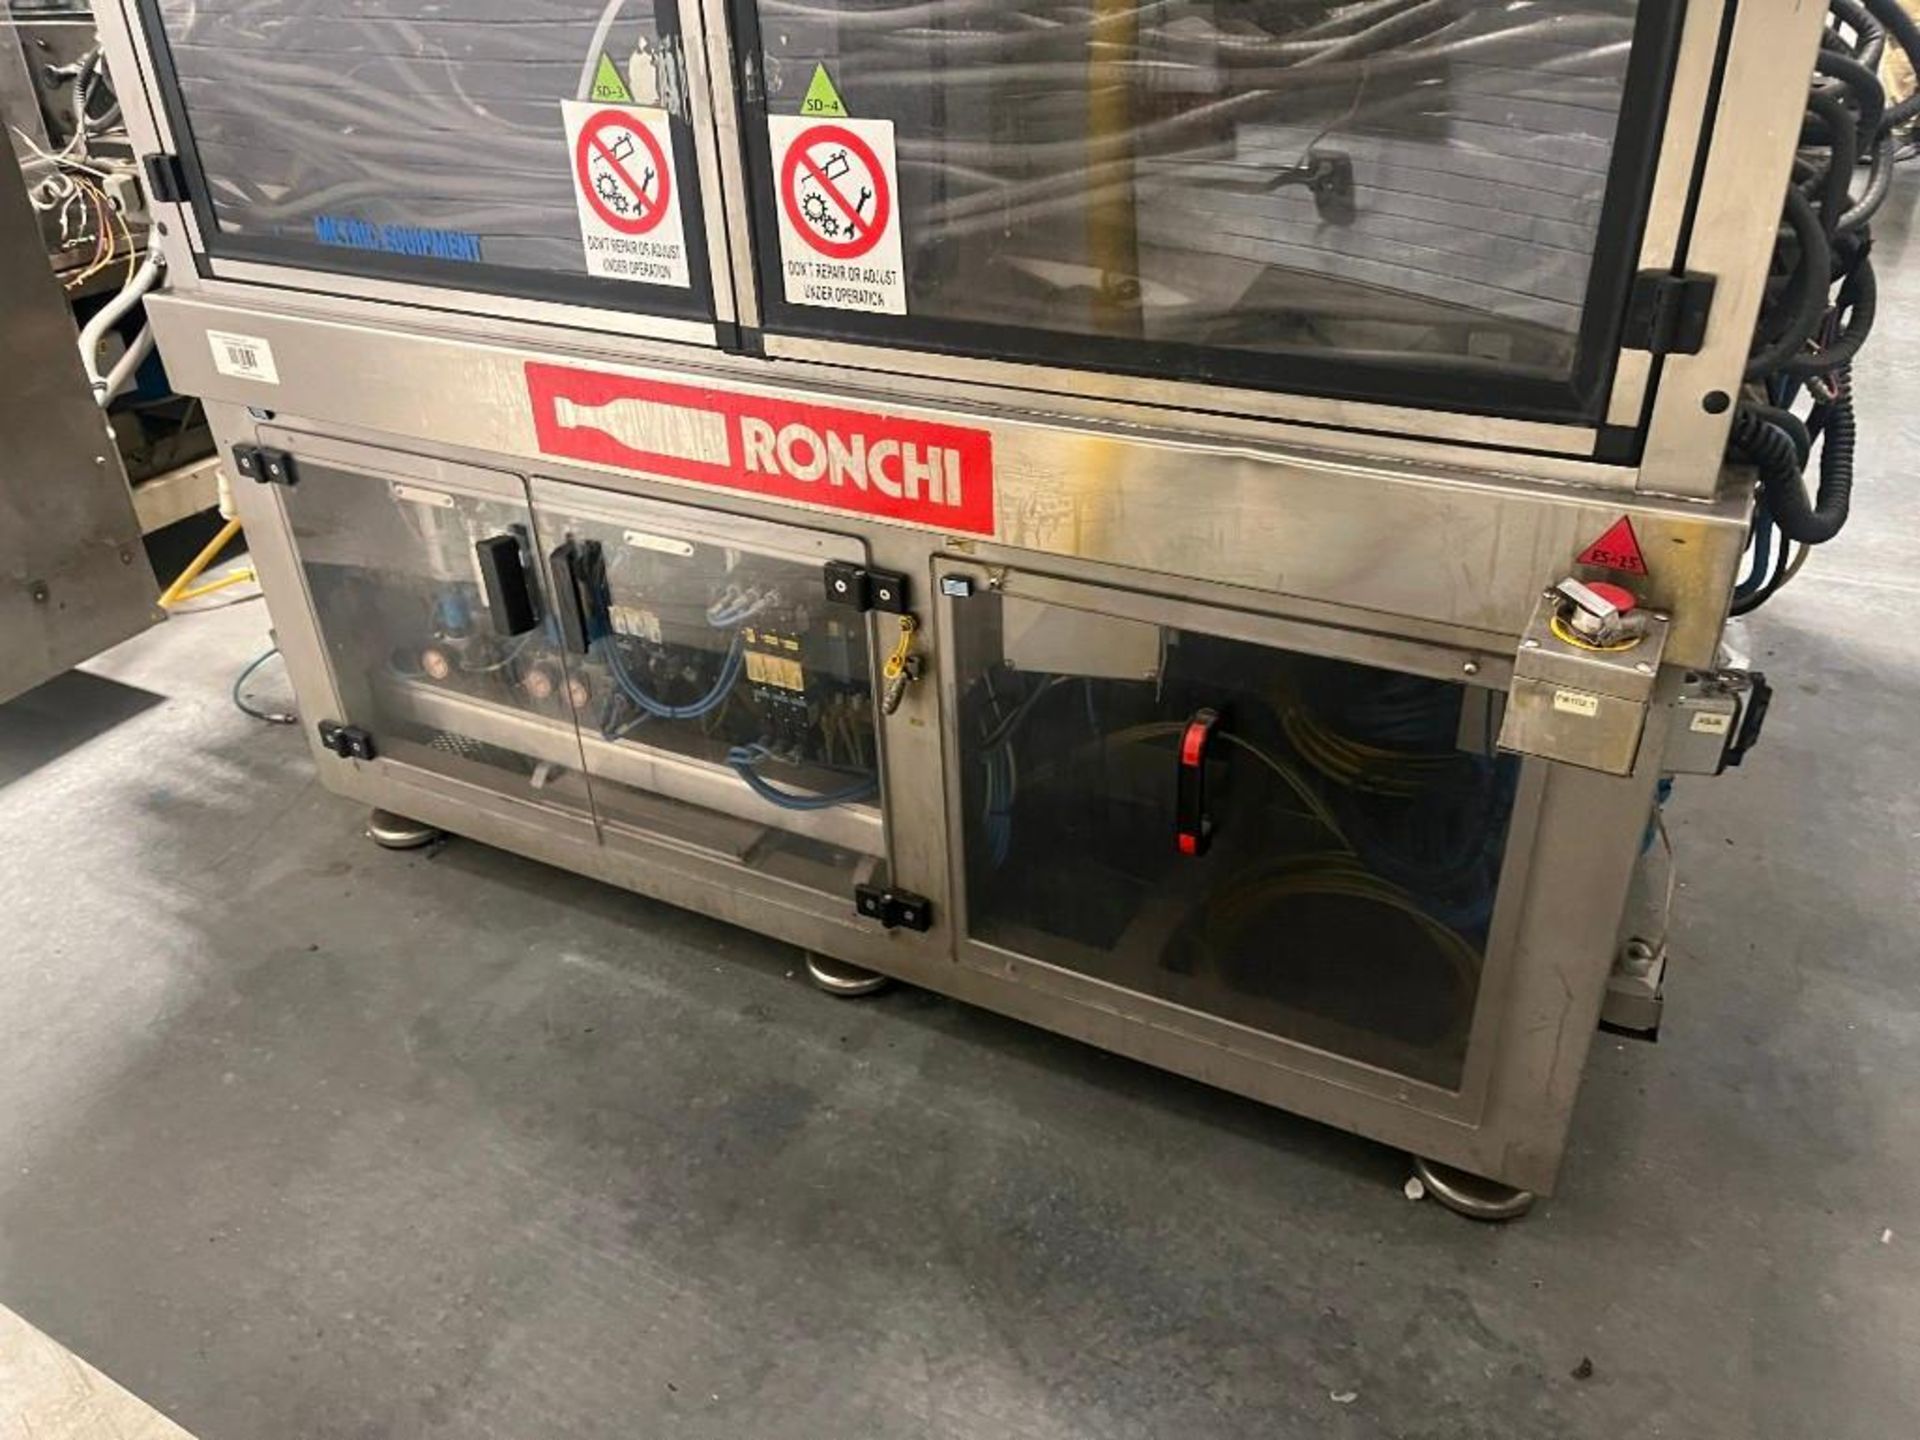 Ronchi 8-Head Rotary Chuck Capper, Model Sirio/PS/8/1, S/N: 3485/TP. Includes Ronchi centrifugal bow - Image 20 of 102